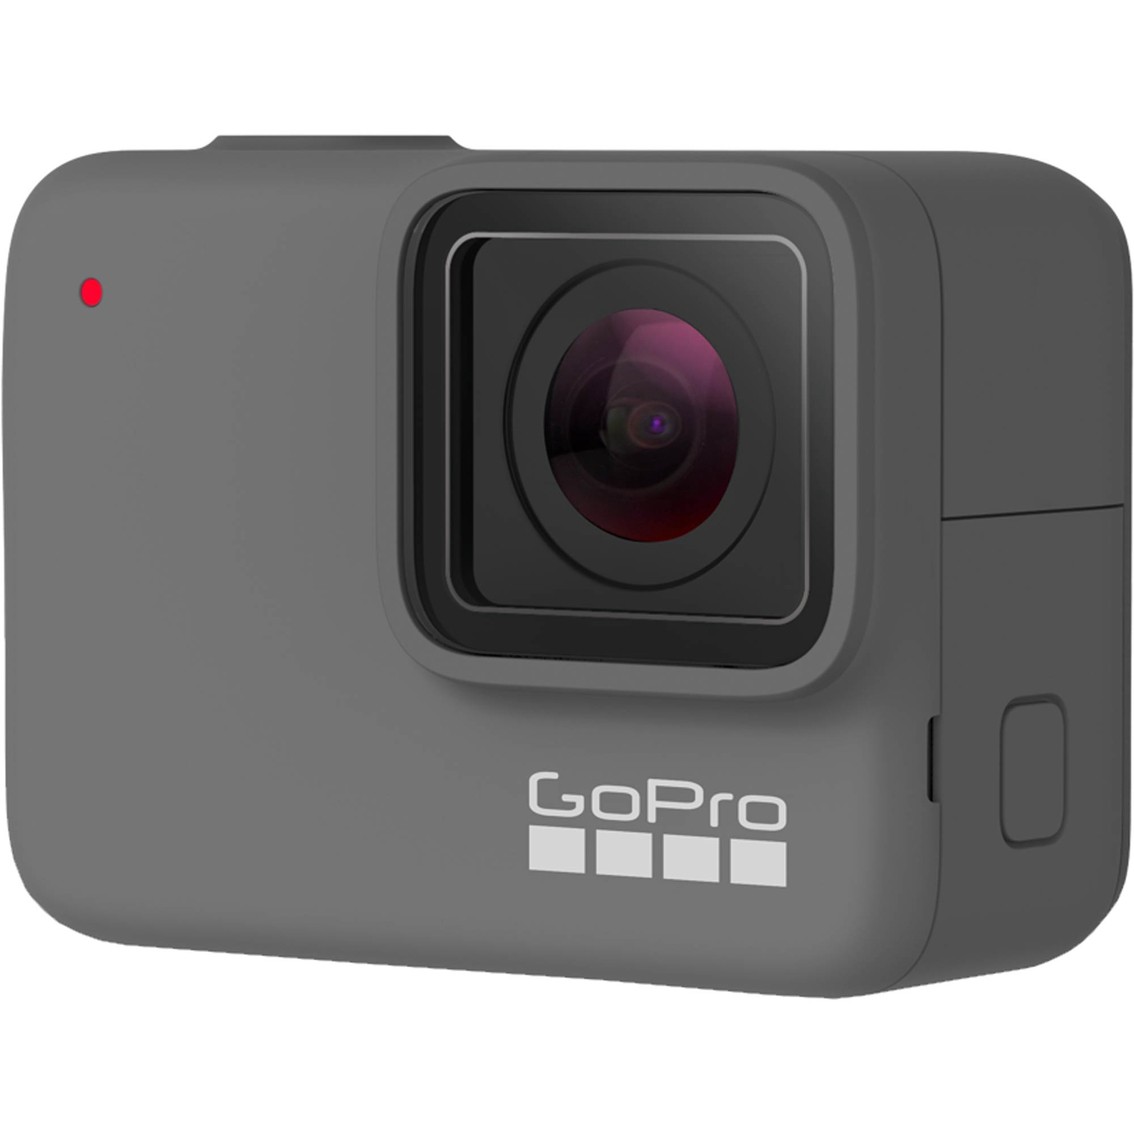 Updated GoPro Hero 7 Black, Silver and White camera specifications 